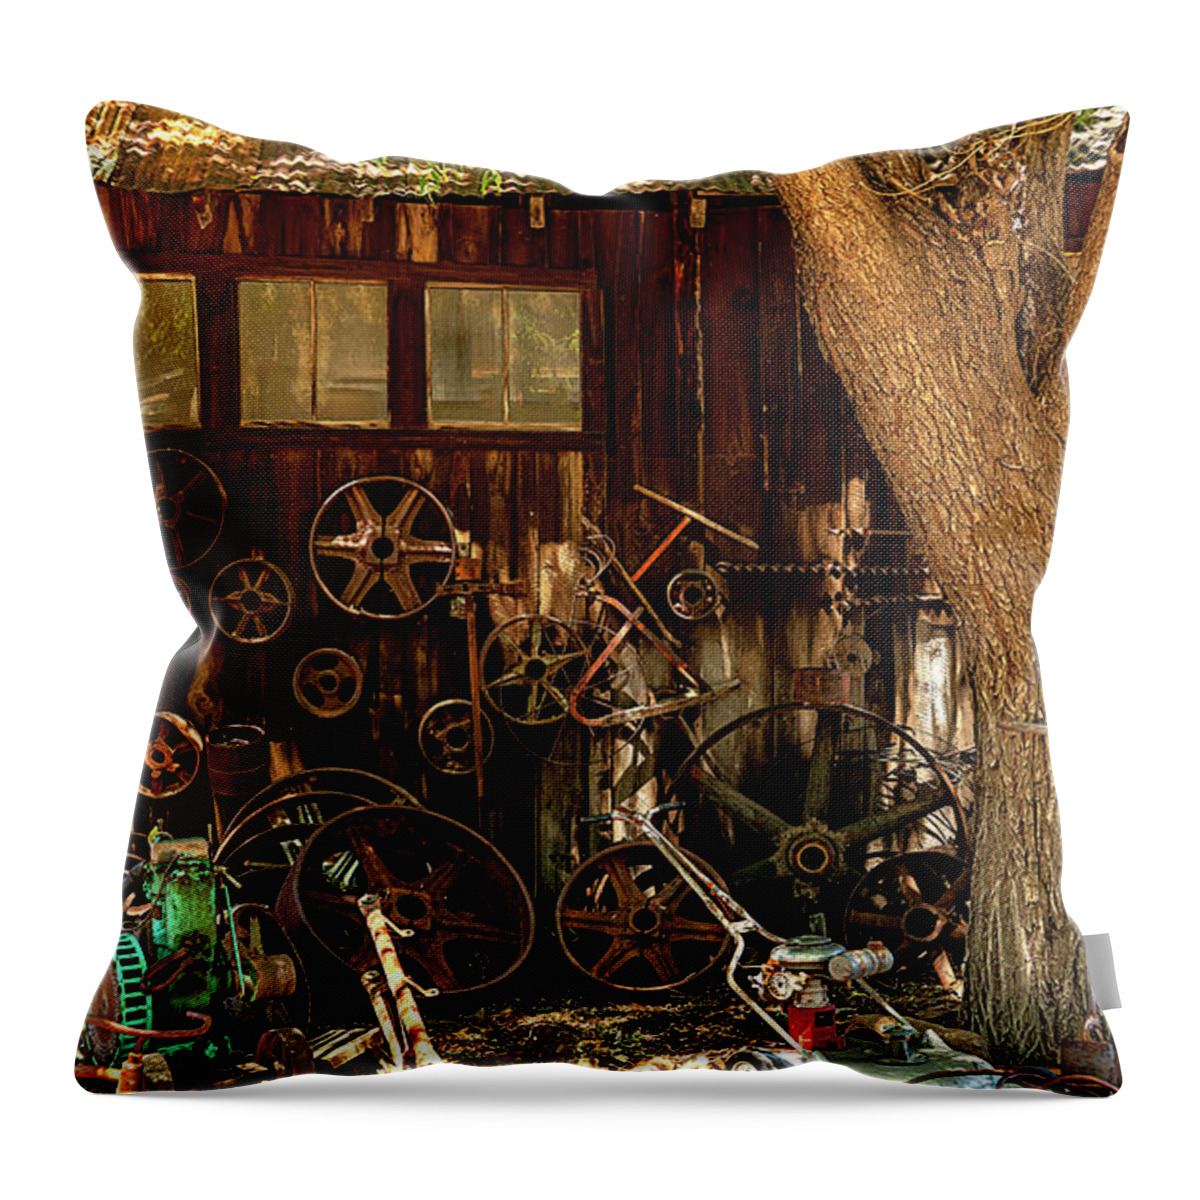  Throw Pillow featuring the photograph Wall of Wheels by Al Judge